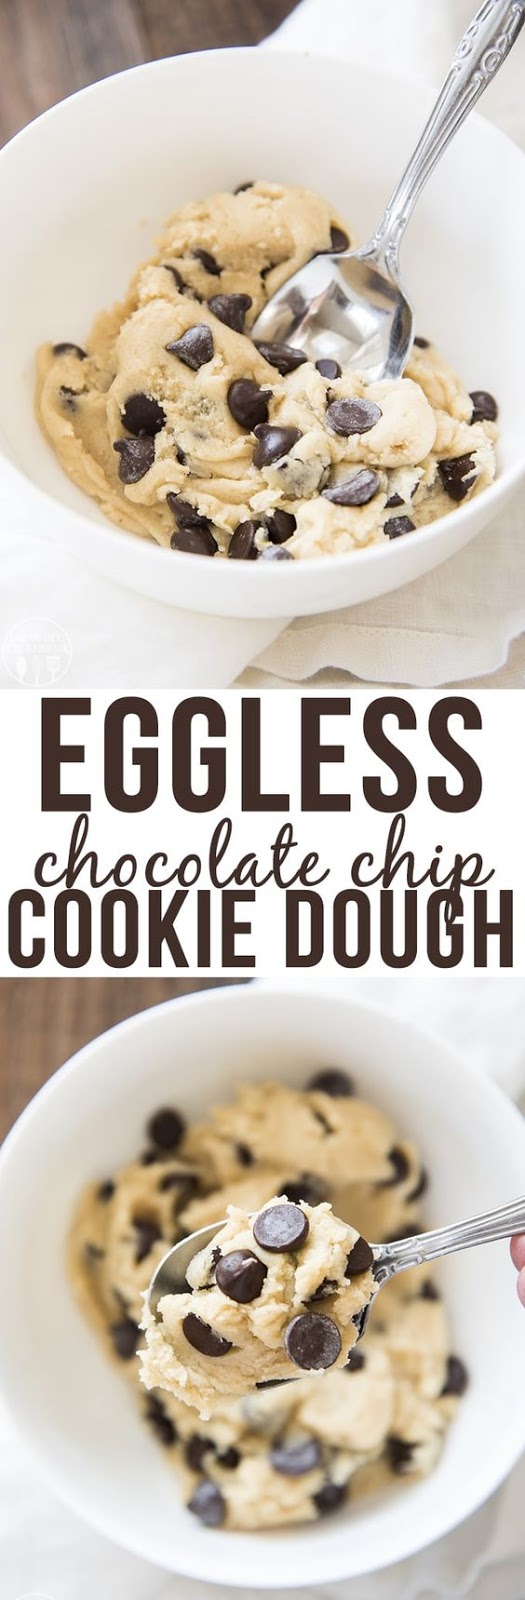 Eggless Cookie Dough for One